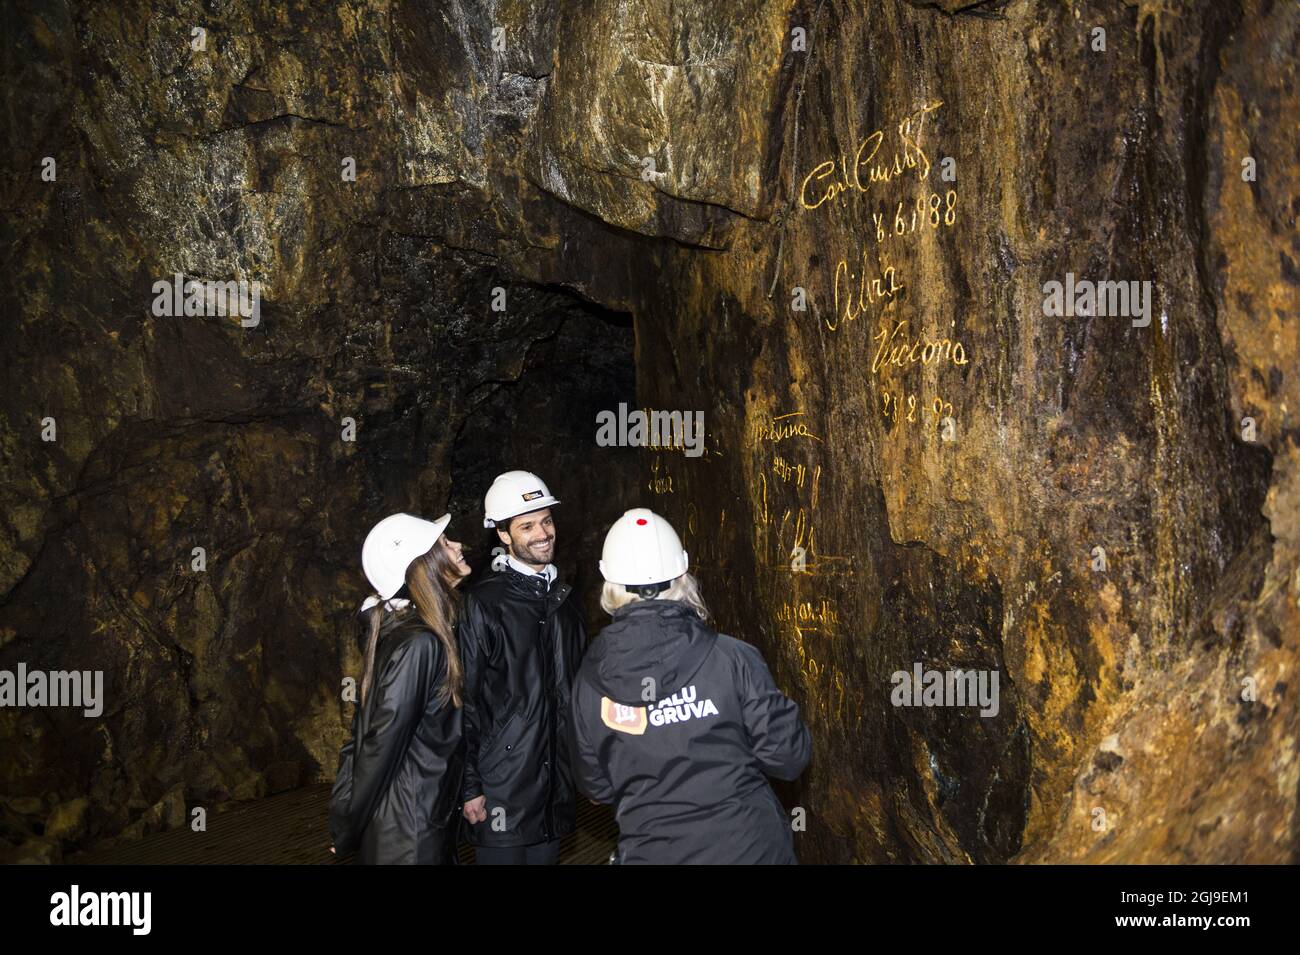 FALUN 2015-10-05 Price Carl Philip and Princess Sofia wrigting their names on the wall beside the King, Queen and Crown Princess Victoria's signature. Prince Carl Philip and Princess Sofia are seen inside the Falu Copper Mine in Falun Dalecarlia, Sweden October 5, 2015. The Prince couple is on an official visit to Dalecarlia which is Princess SofaÂ’s home county. Foto: Pontus Lundahl / TT / kod 10050  Stock Photo